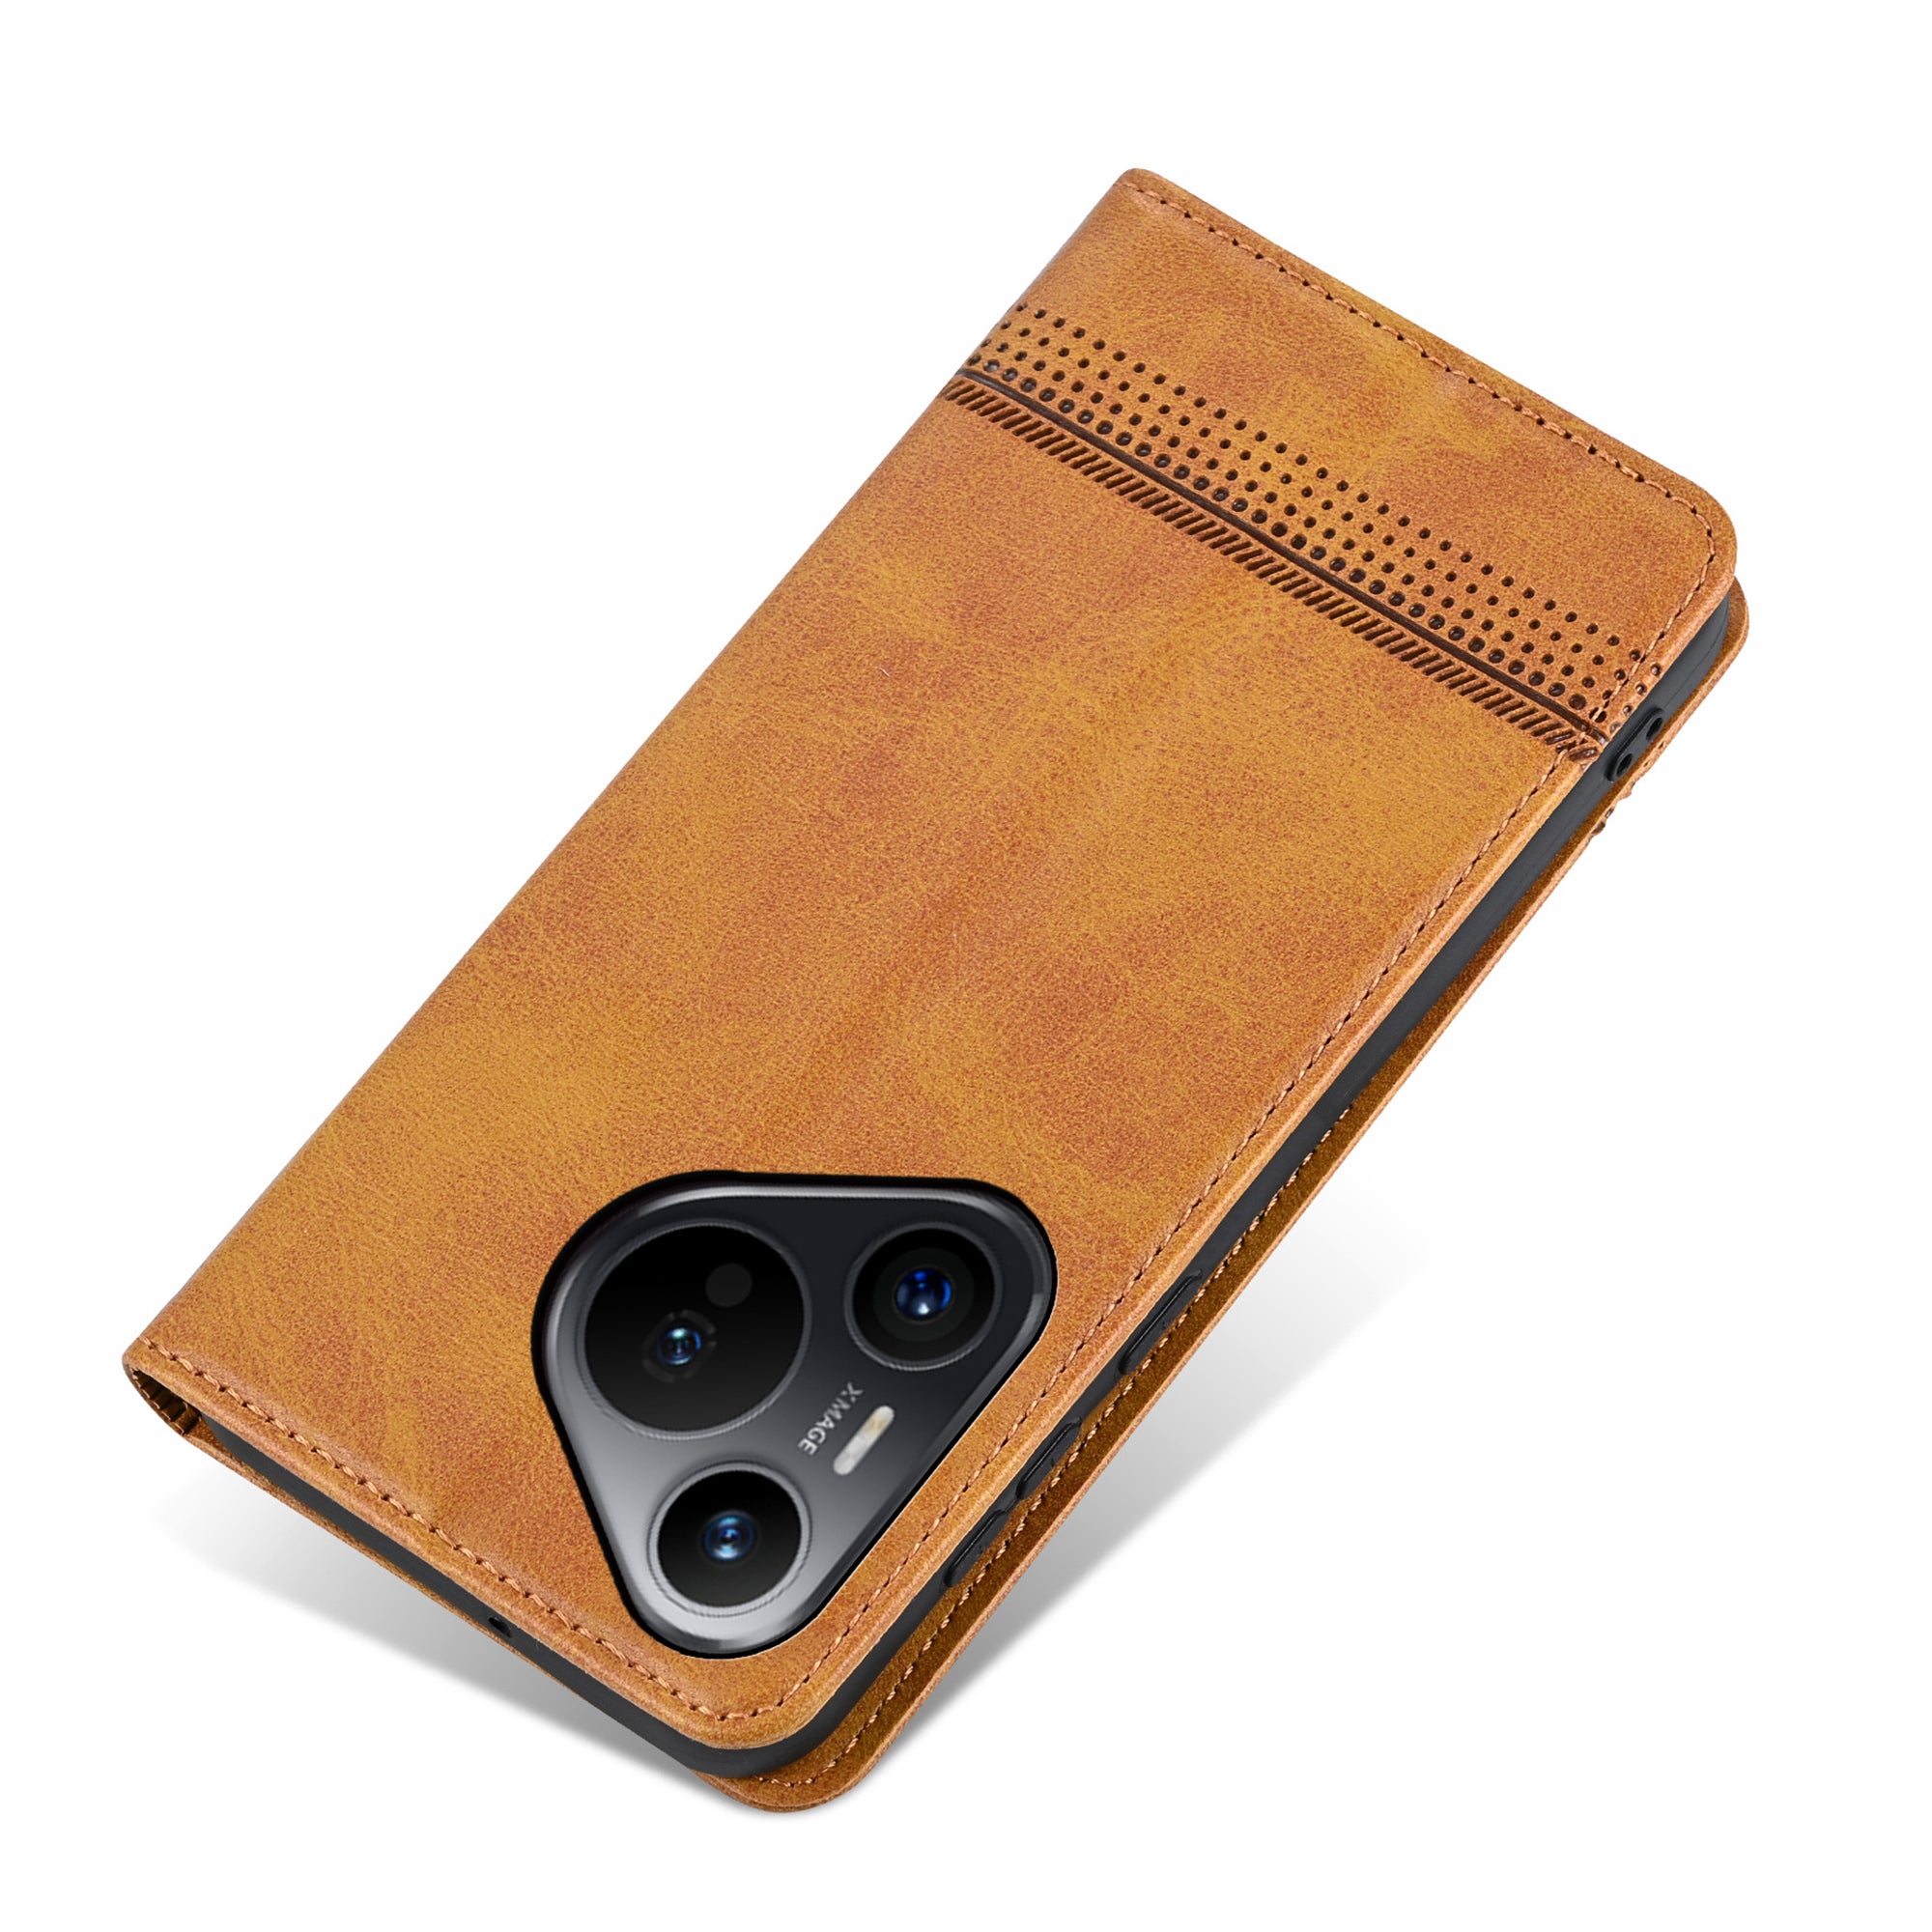 AZNS For Huawei Pura 70 Wallet Case PU Leather Magnetic Shock Absorbing Phone Cover - Brown